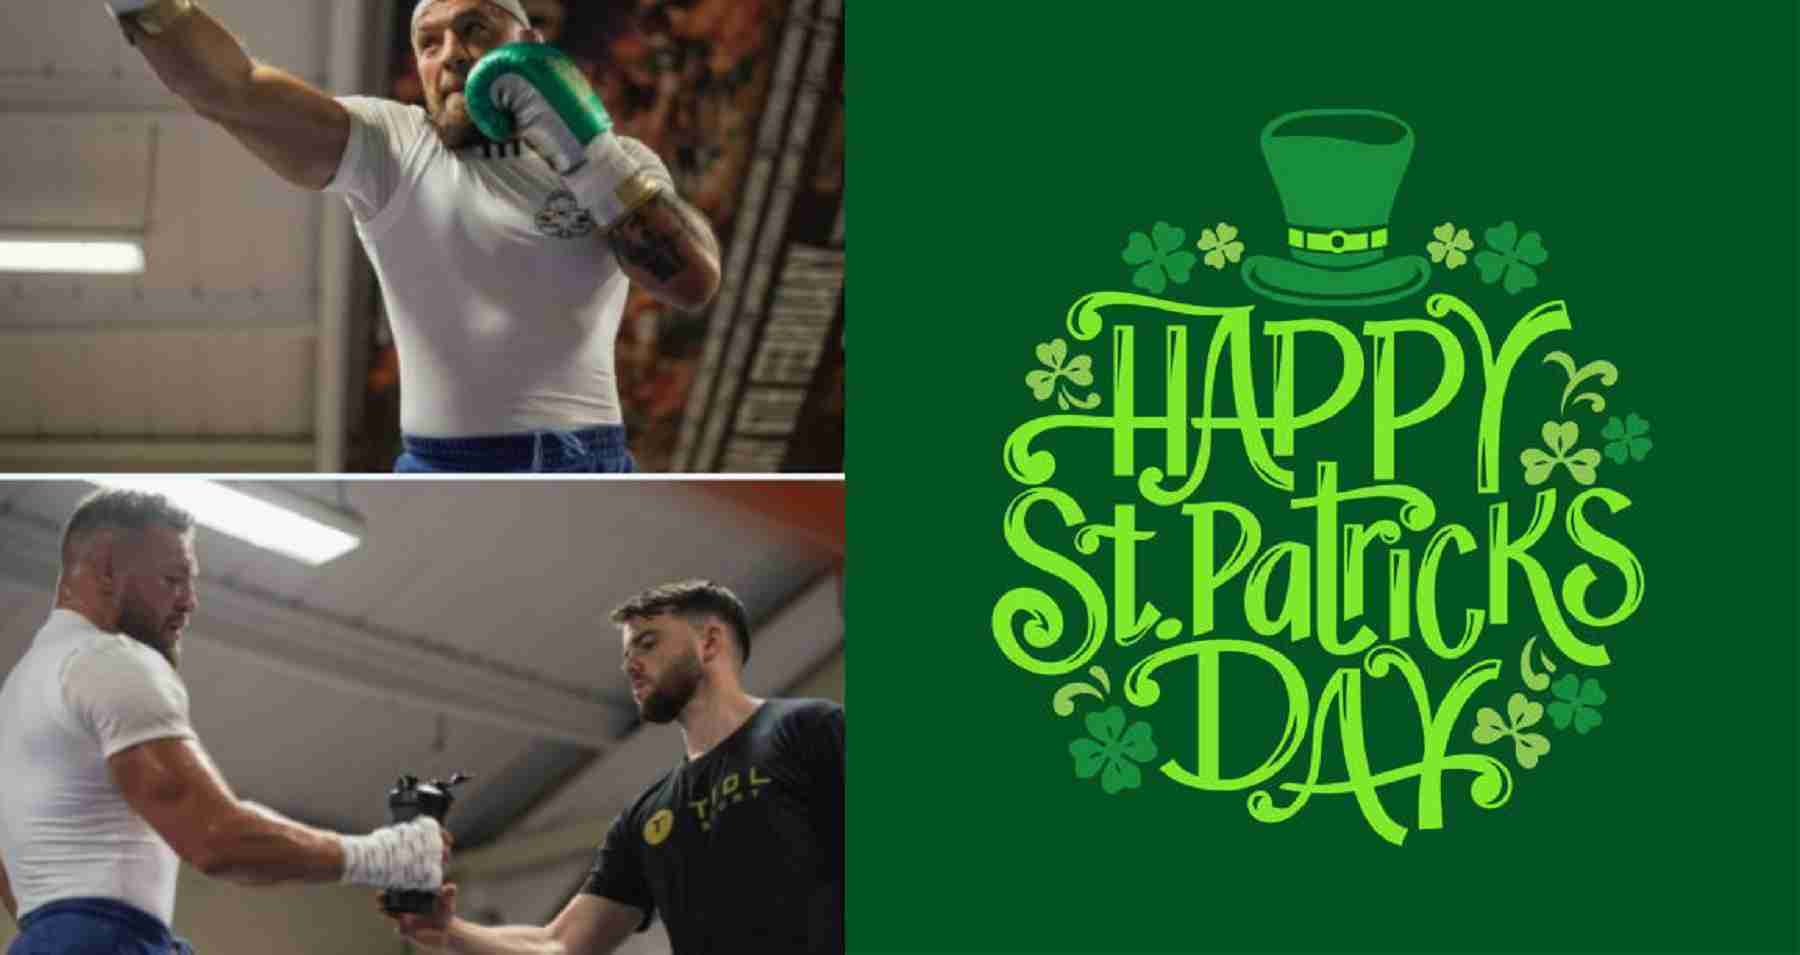 Conor McGregor Takes It Back To The Beginning On St. Patrick's Day 2022